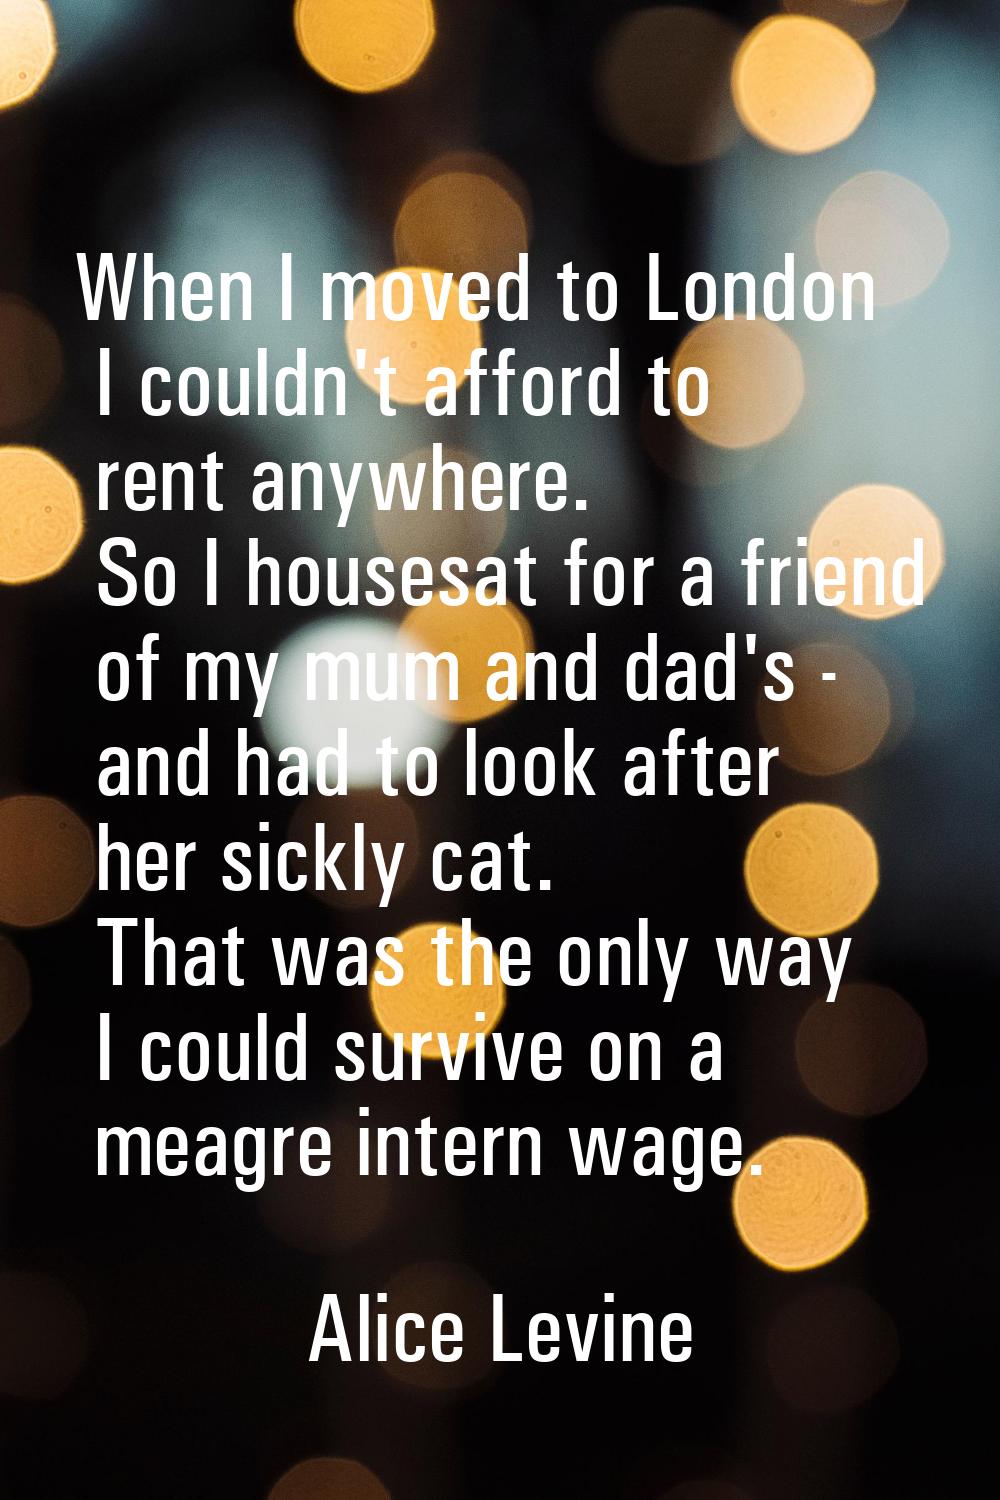 When I moved to London I couldn't afford to rent anywhere. So I housesat for a friend of my mum and